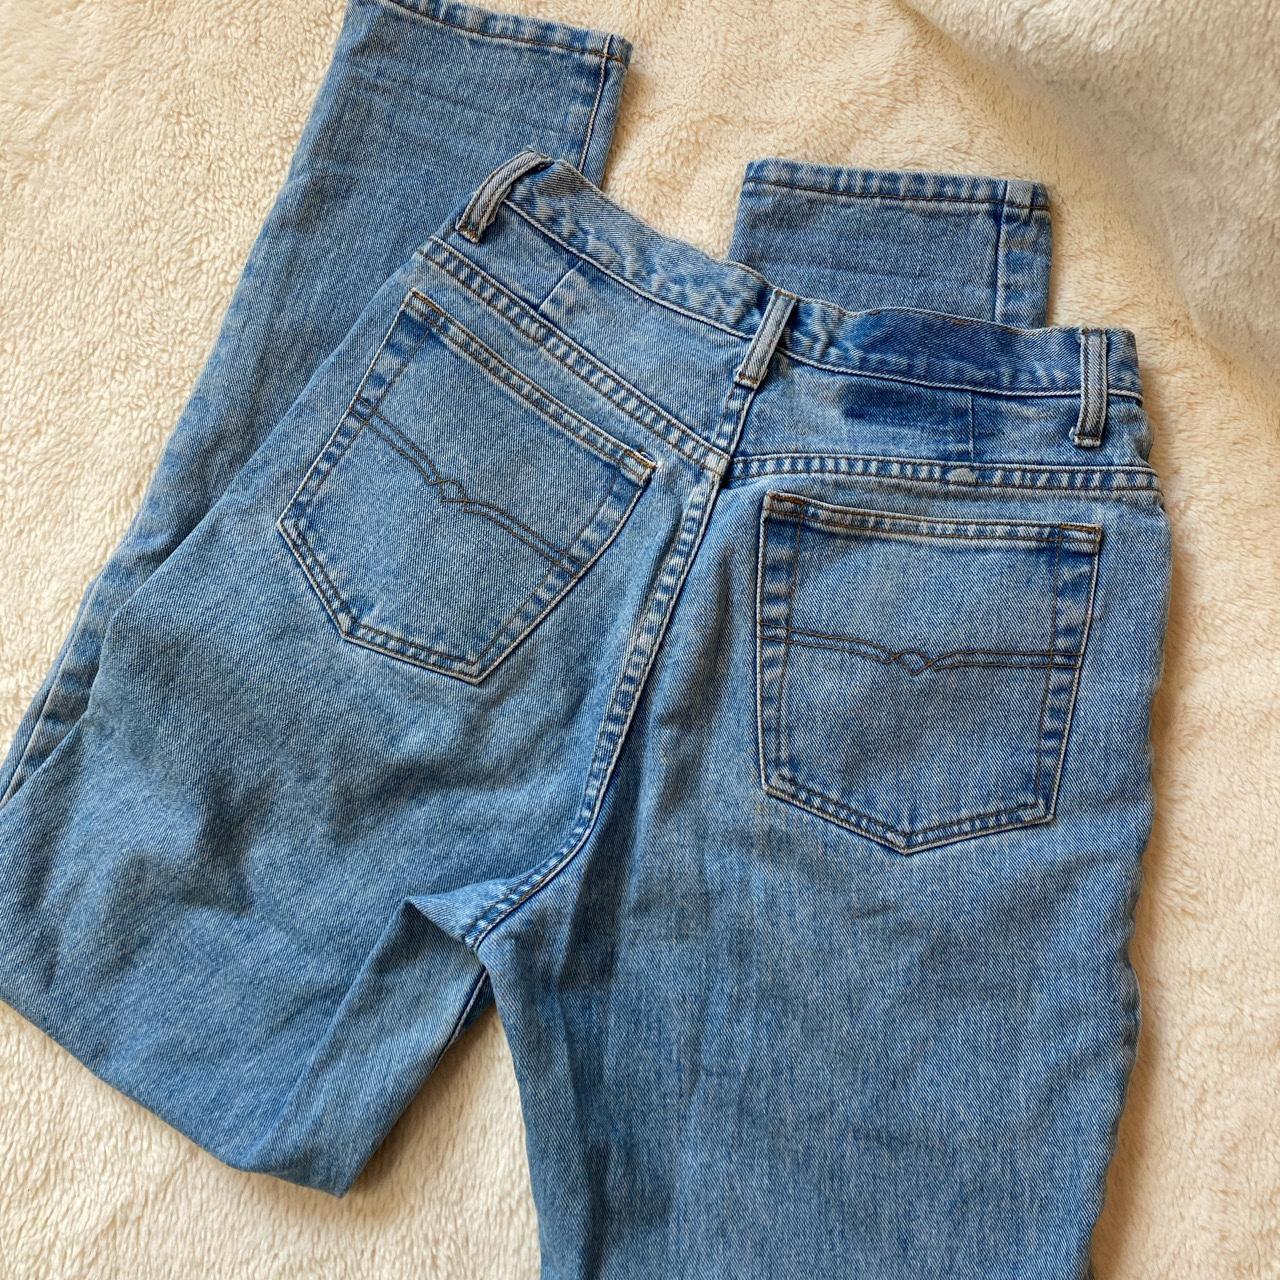 Women's Blue and Navy Jeans (4)